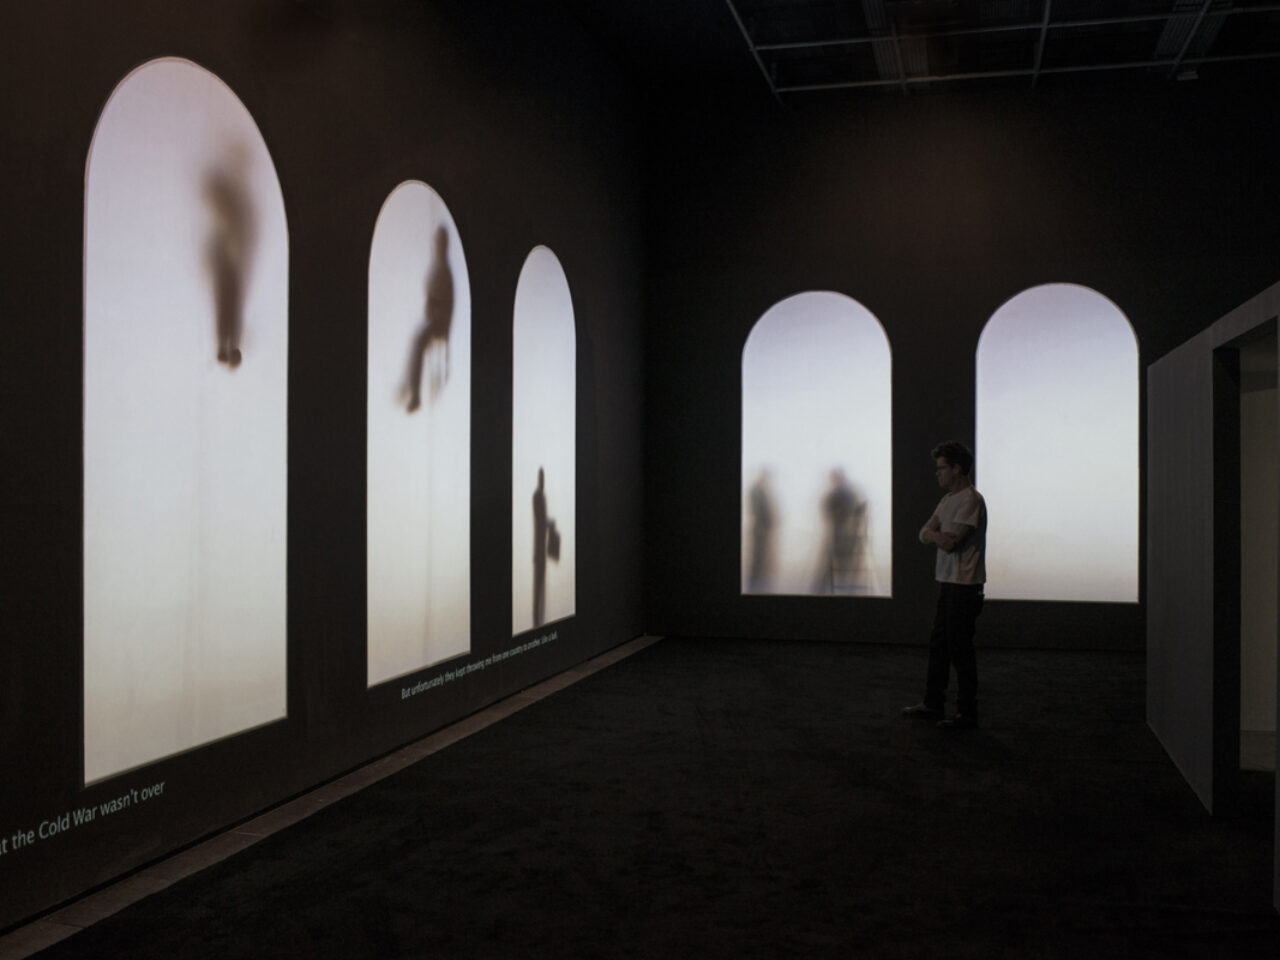 A dark lit room with five projected arches on the wall, with figures of people standing, leaning and floating, there are various passages of writing at the bottom of the wall.